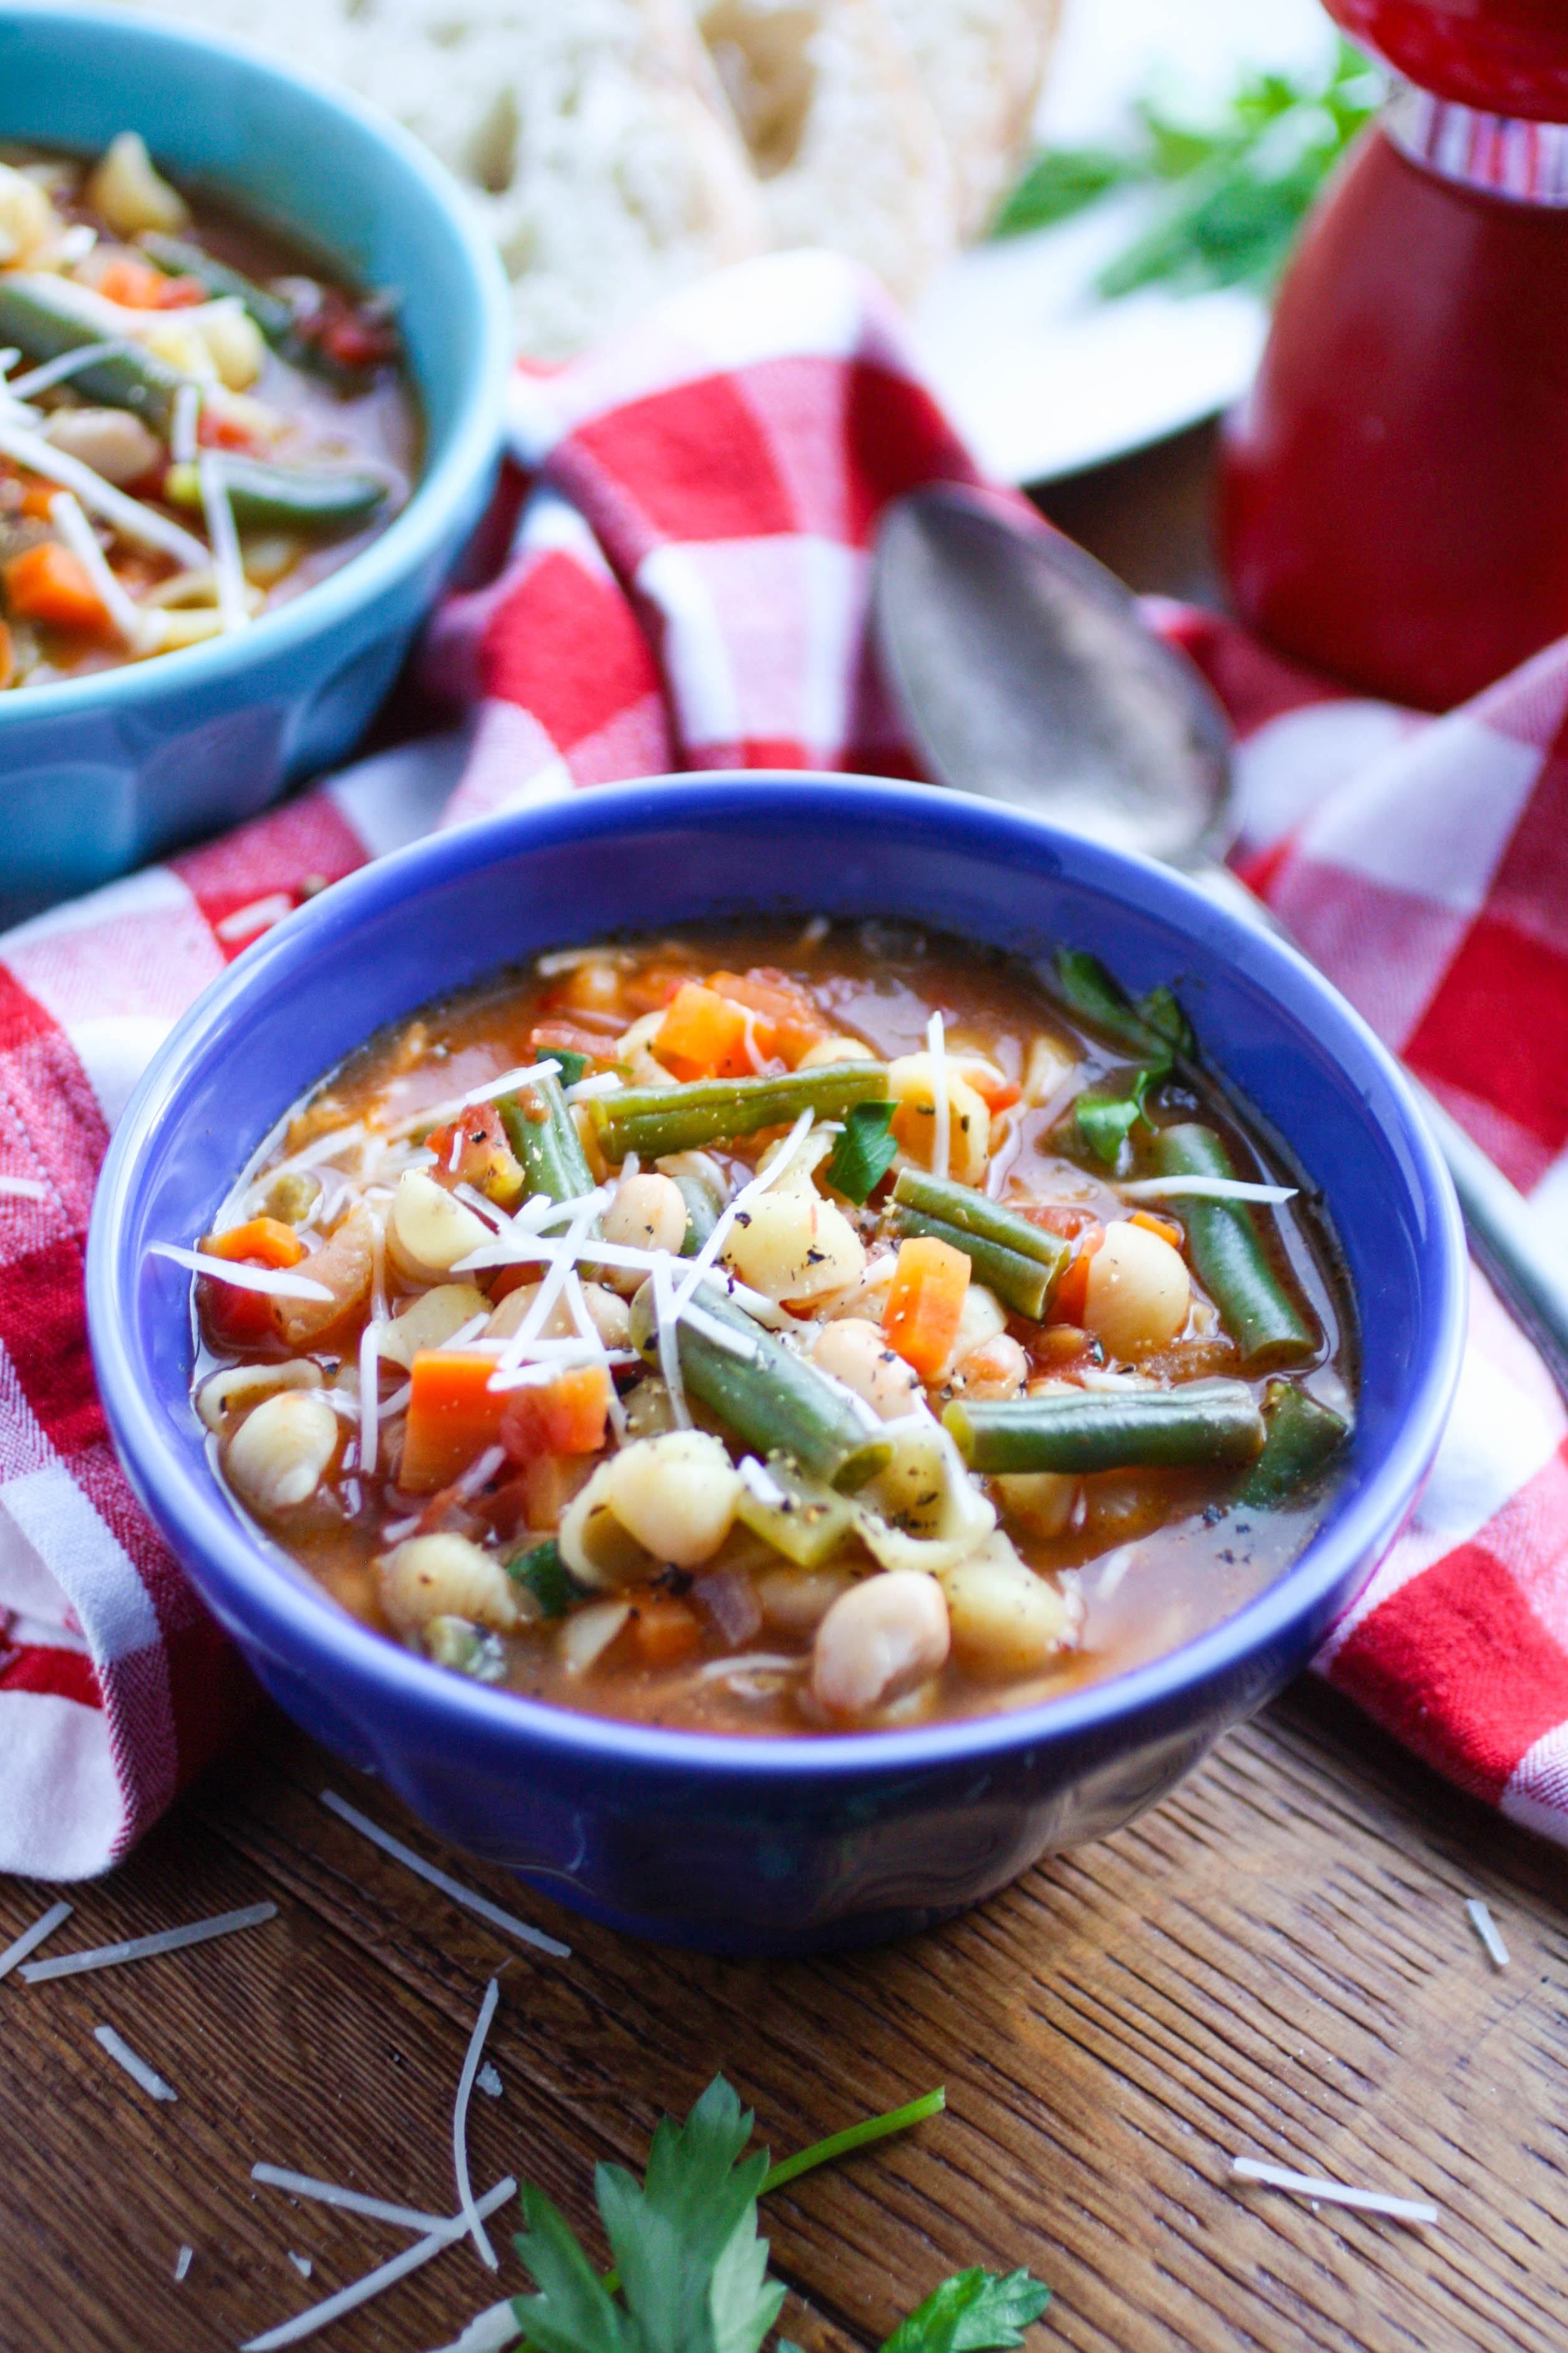 Minestrone Soup is a delightful dish filled with veggies and flavor. Minestrone soup is such an easy dish to make. You'll love it!